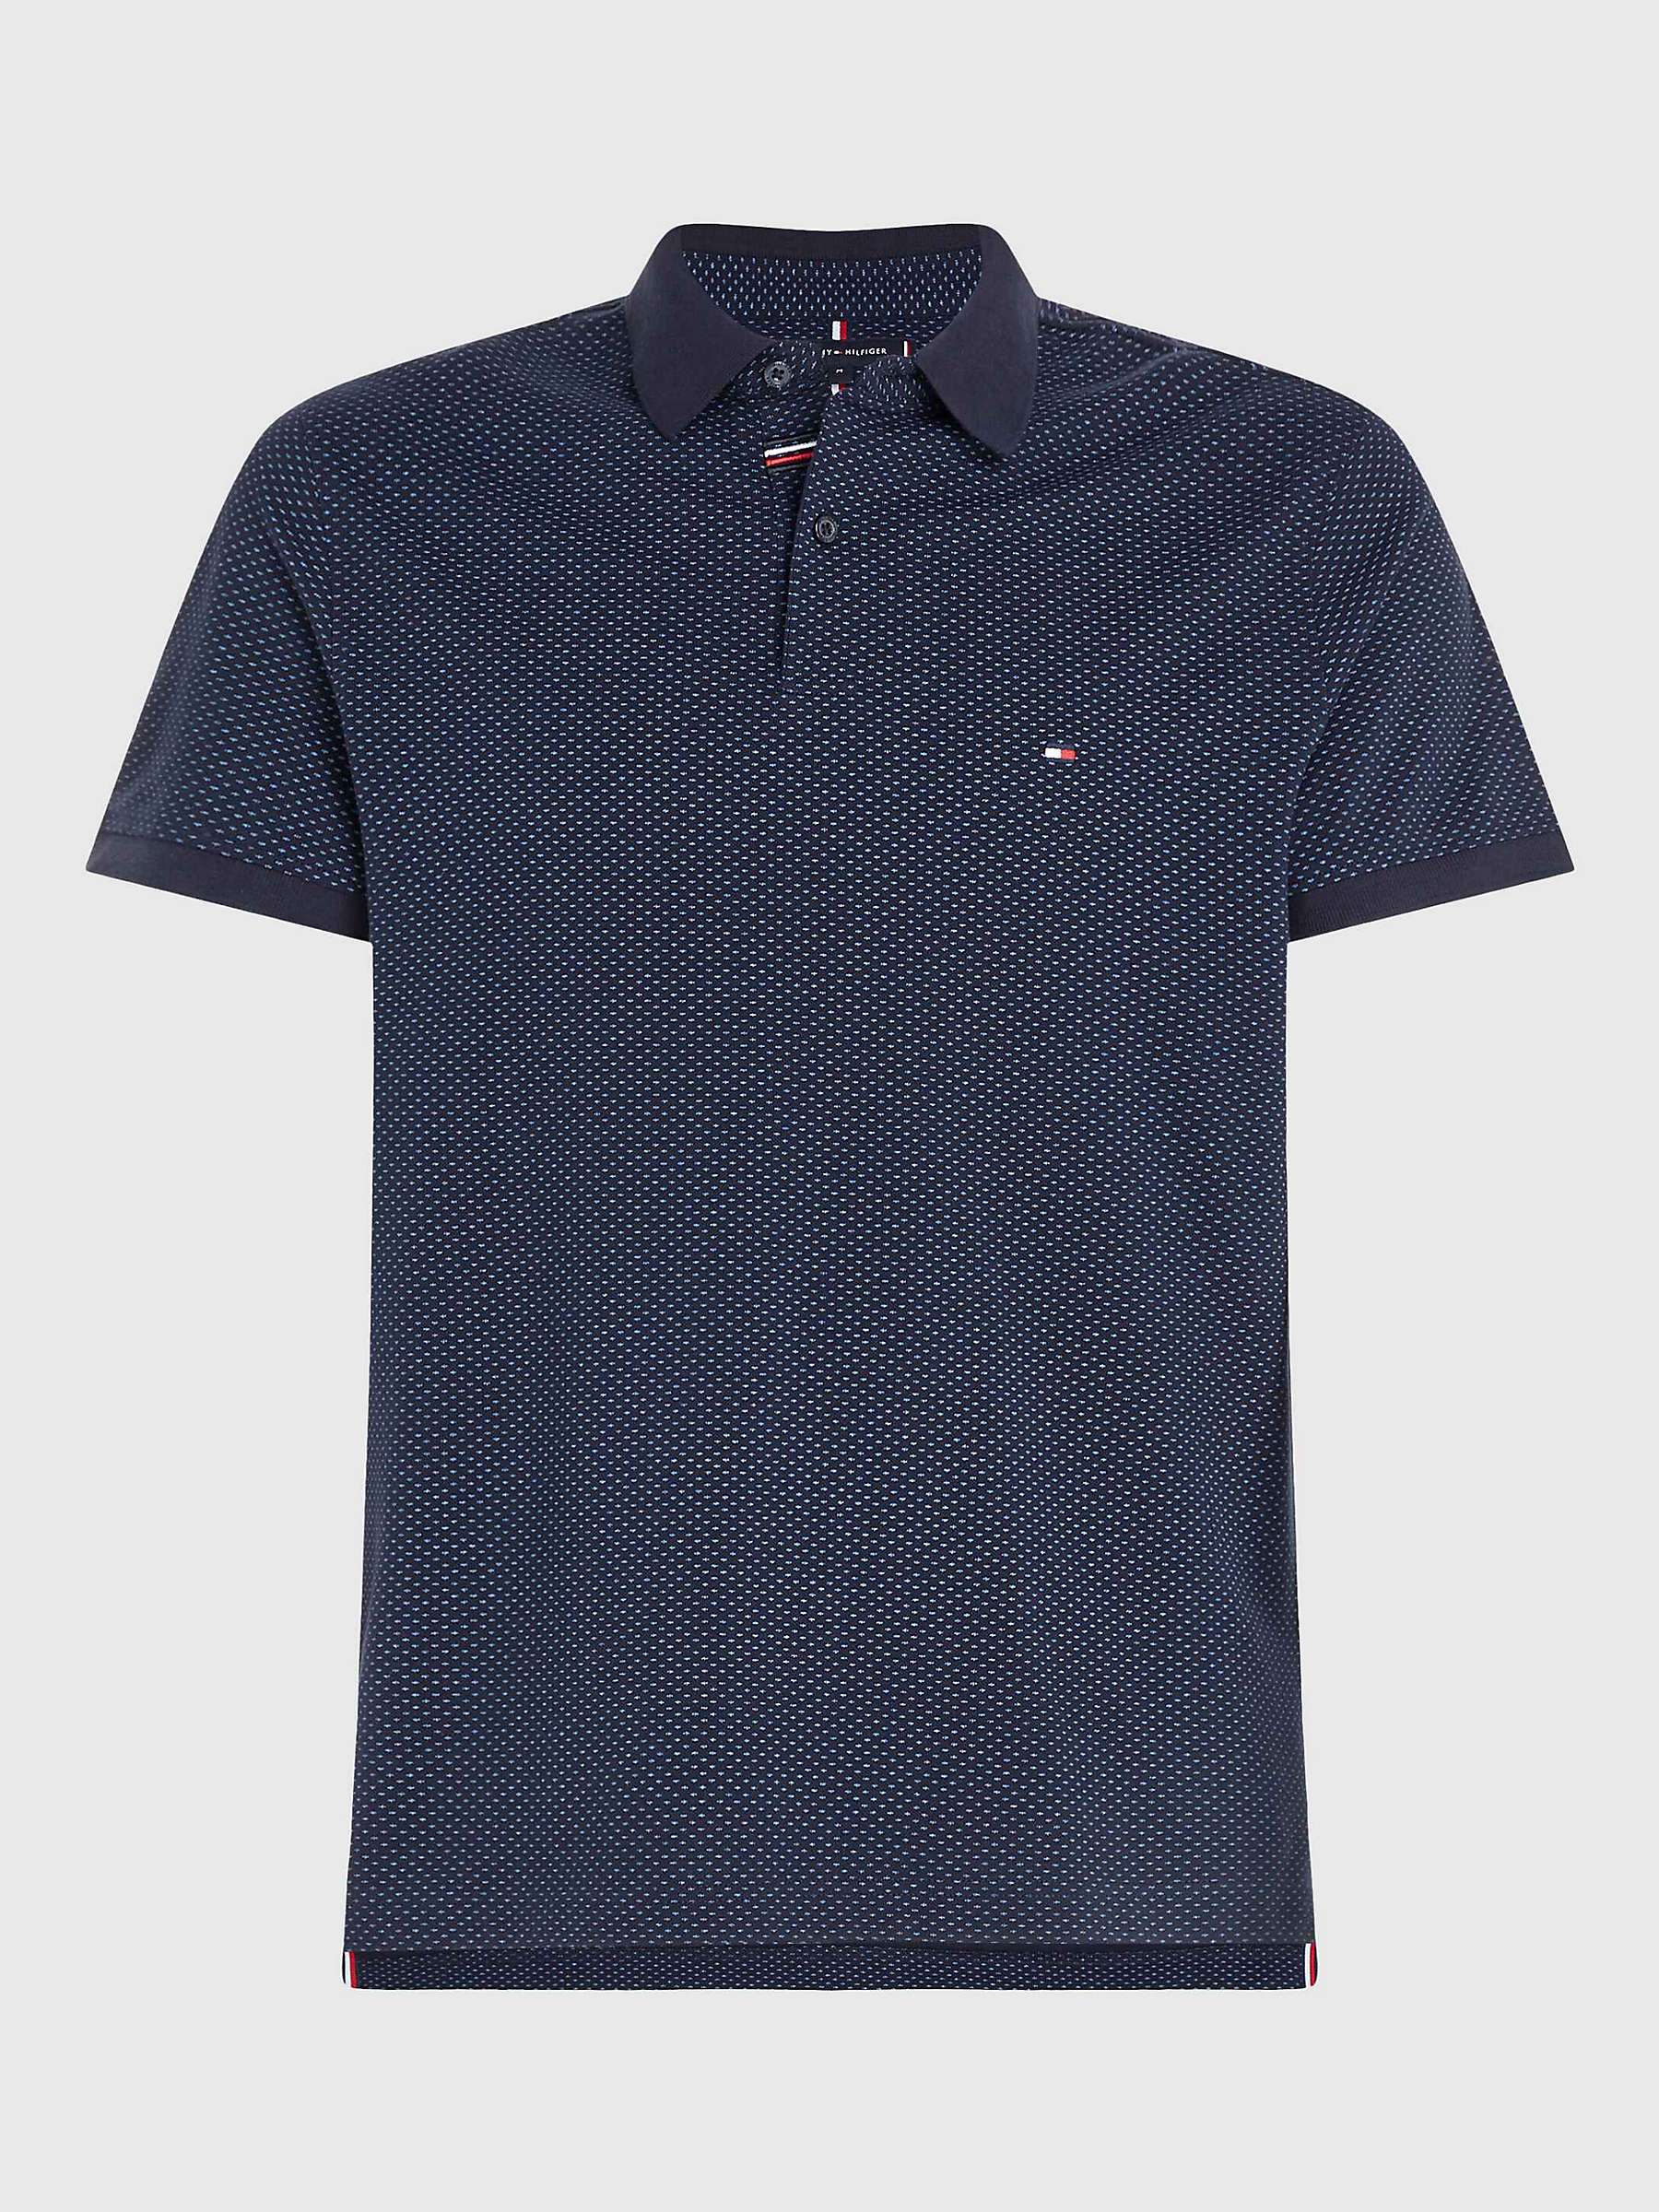 Buy Tommy Hilfiger 1985 Micro Print Slim Fit Polo Shirt Online at johnlewis.com